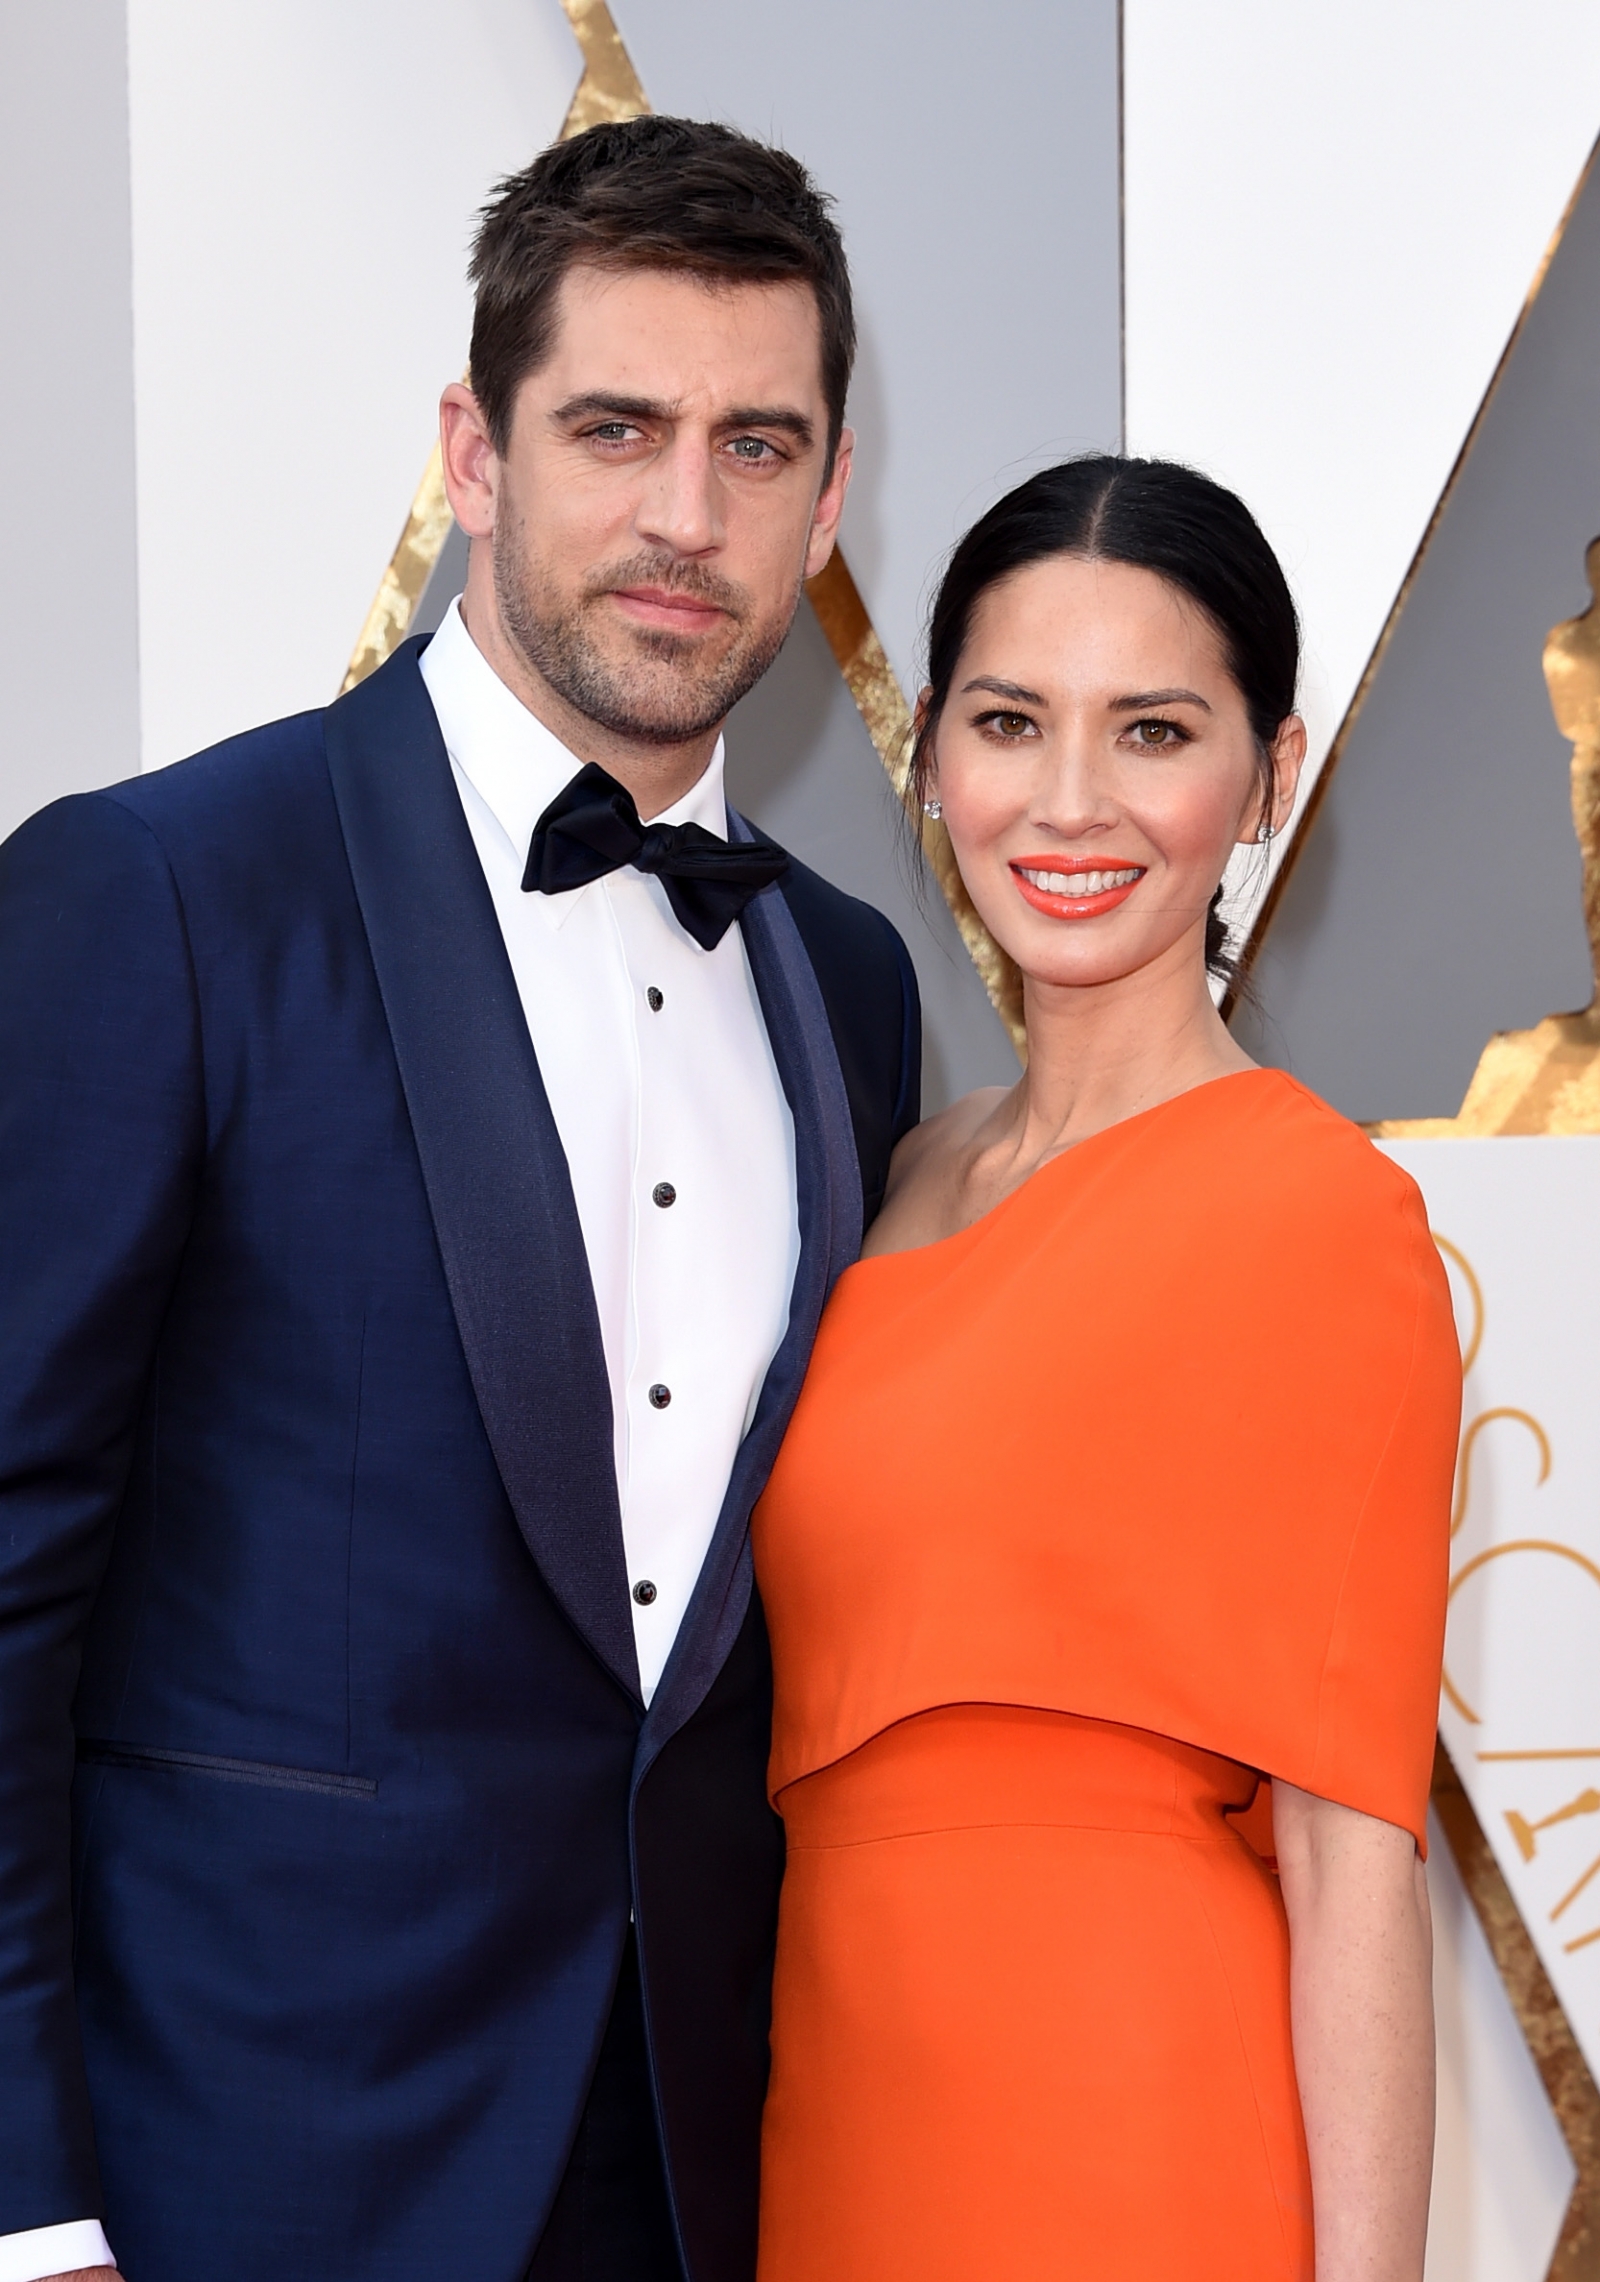 NFL star Aaron Rodgers and Olivia Munn engaged? 